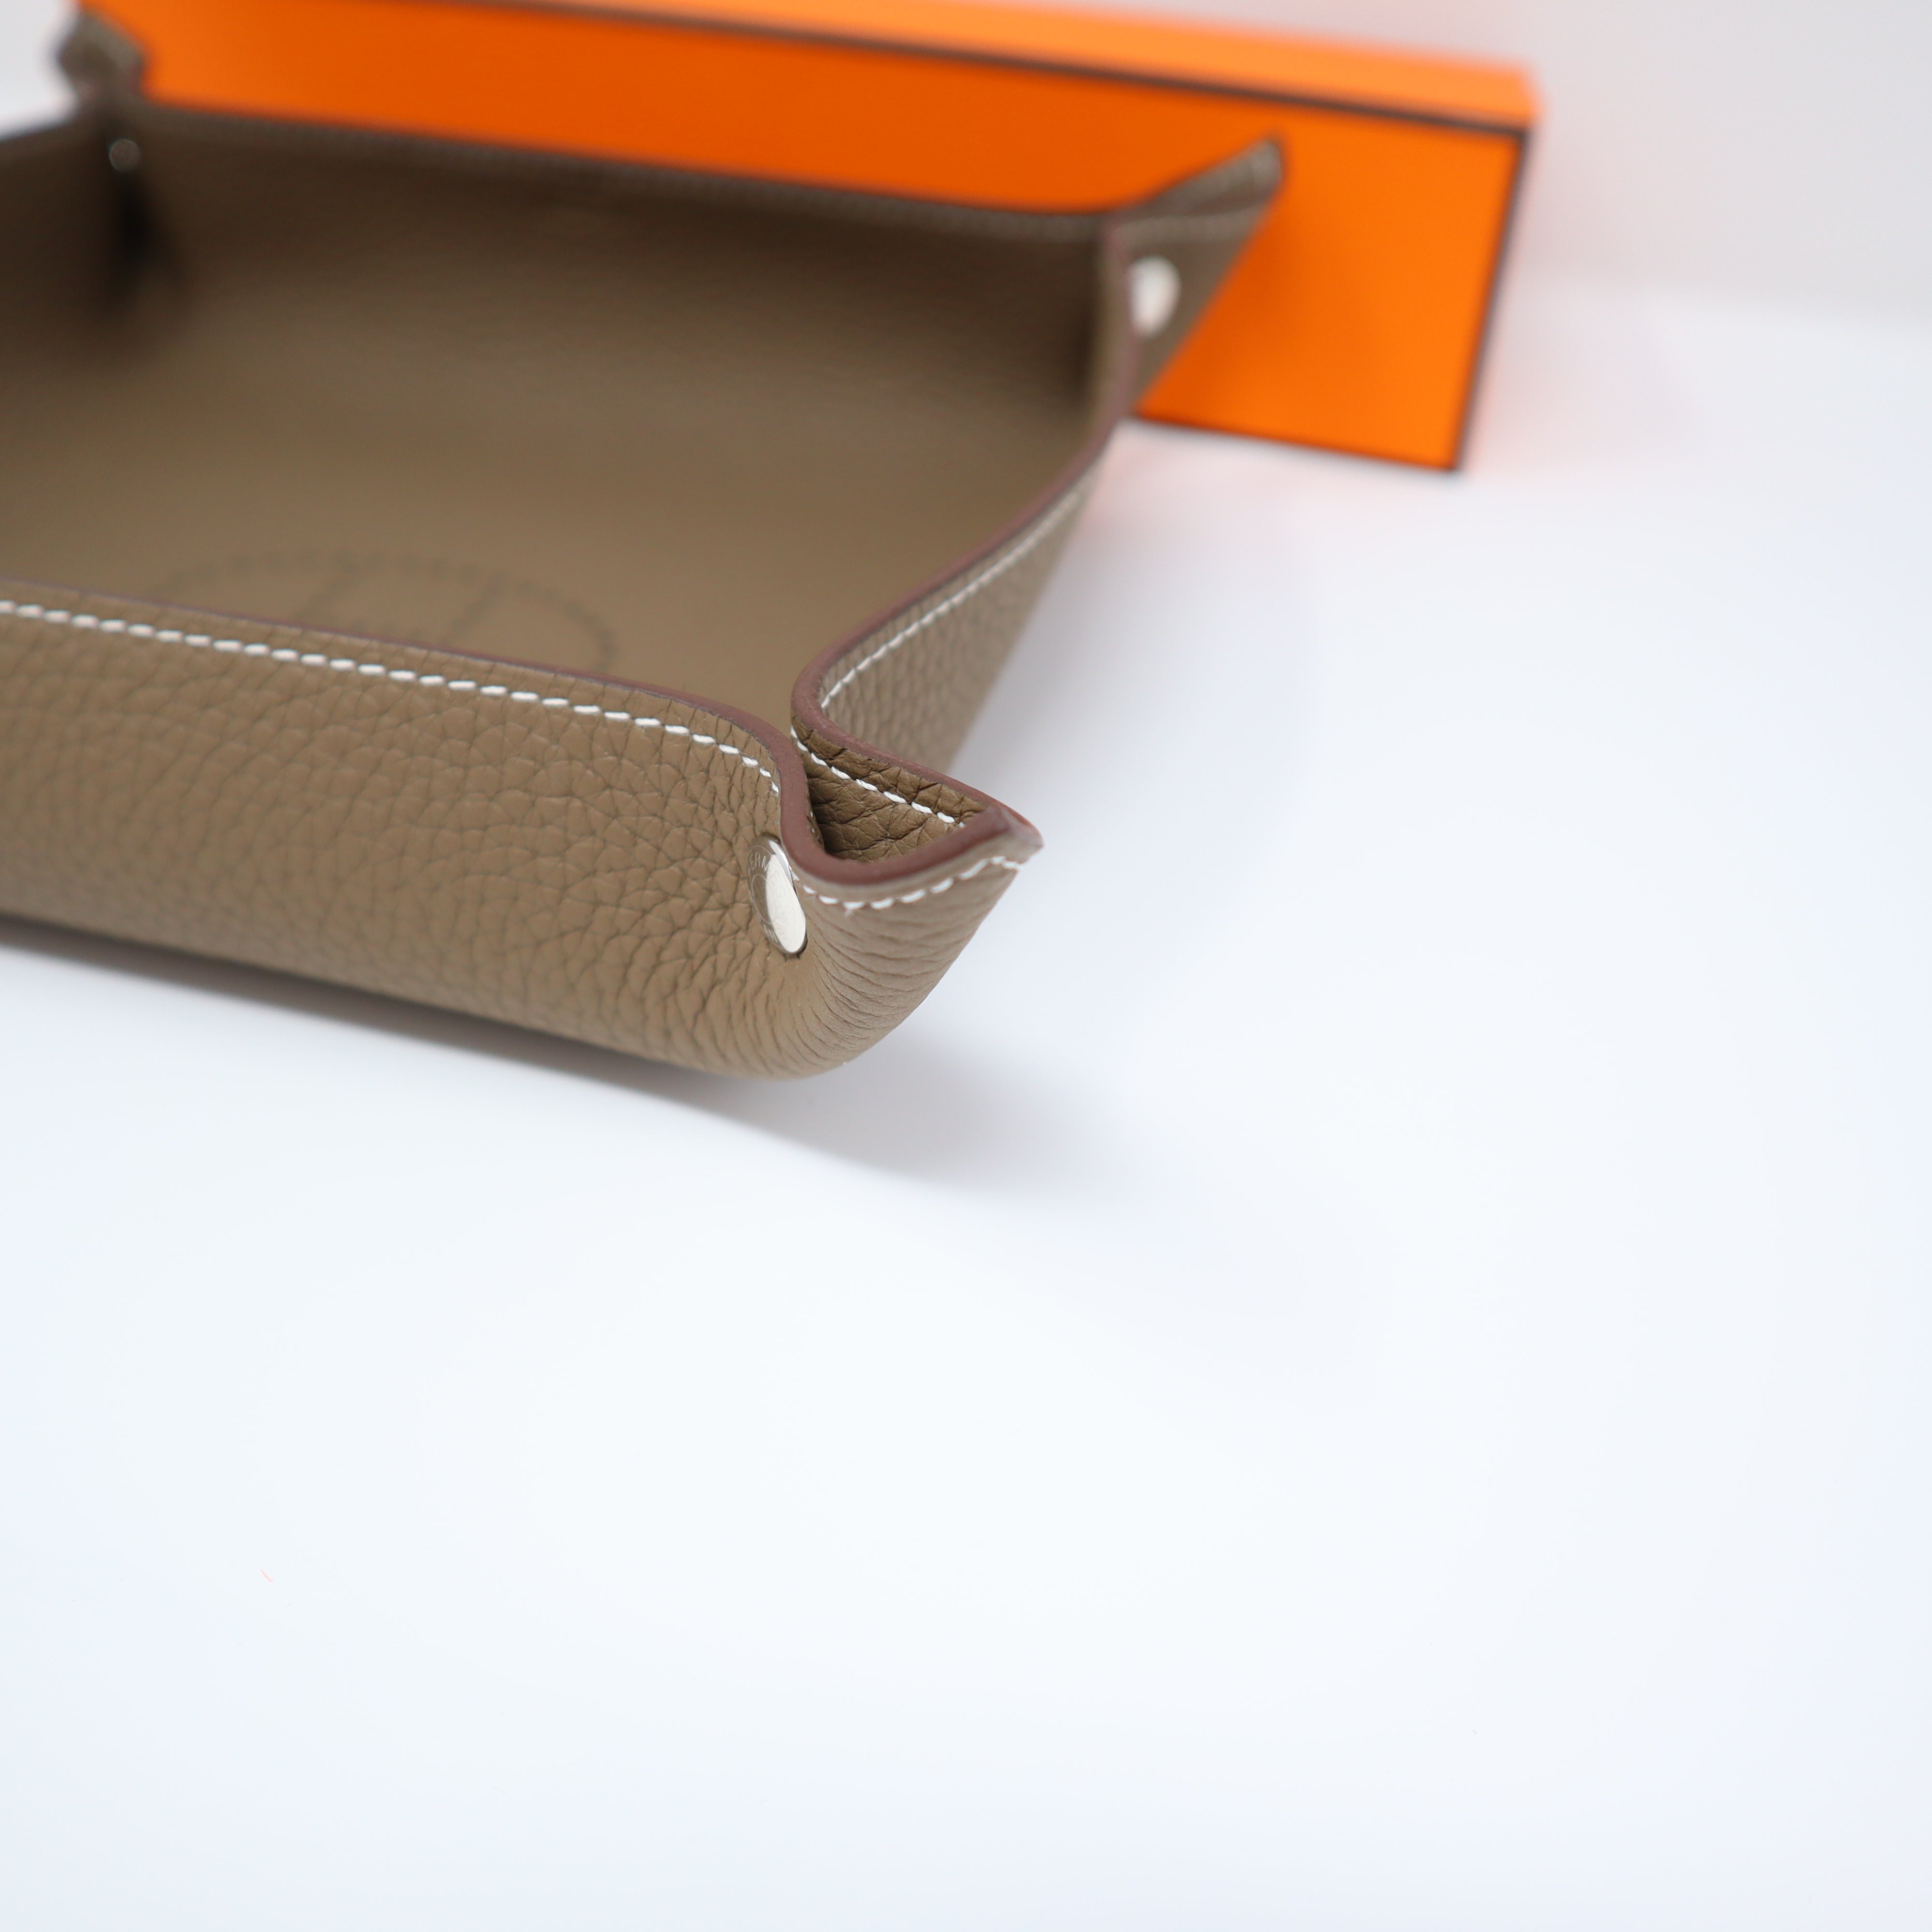 Hermès Now Offers A Leather Charging Change Tray - BAGAHOLICBOY